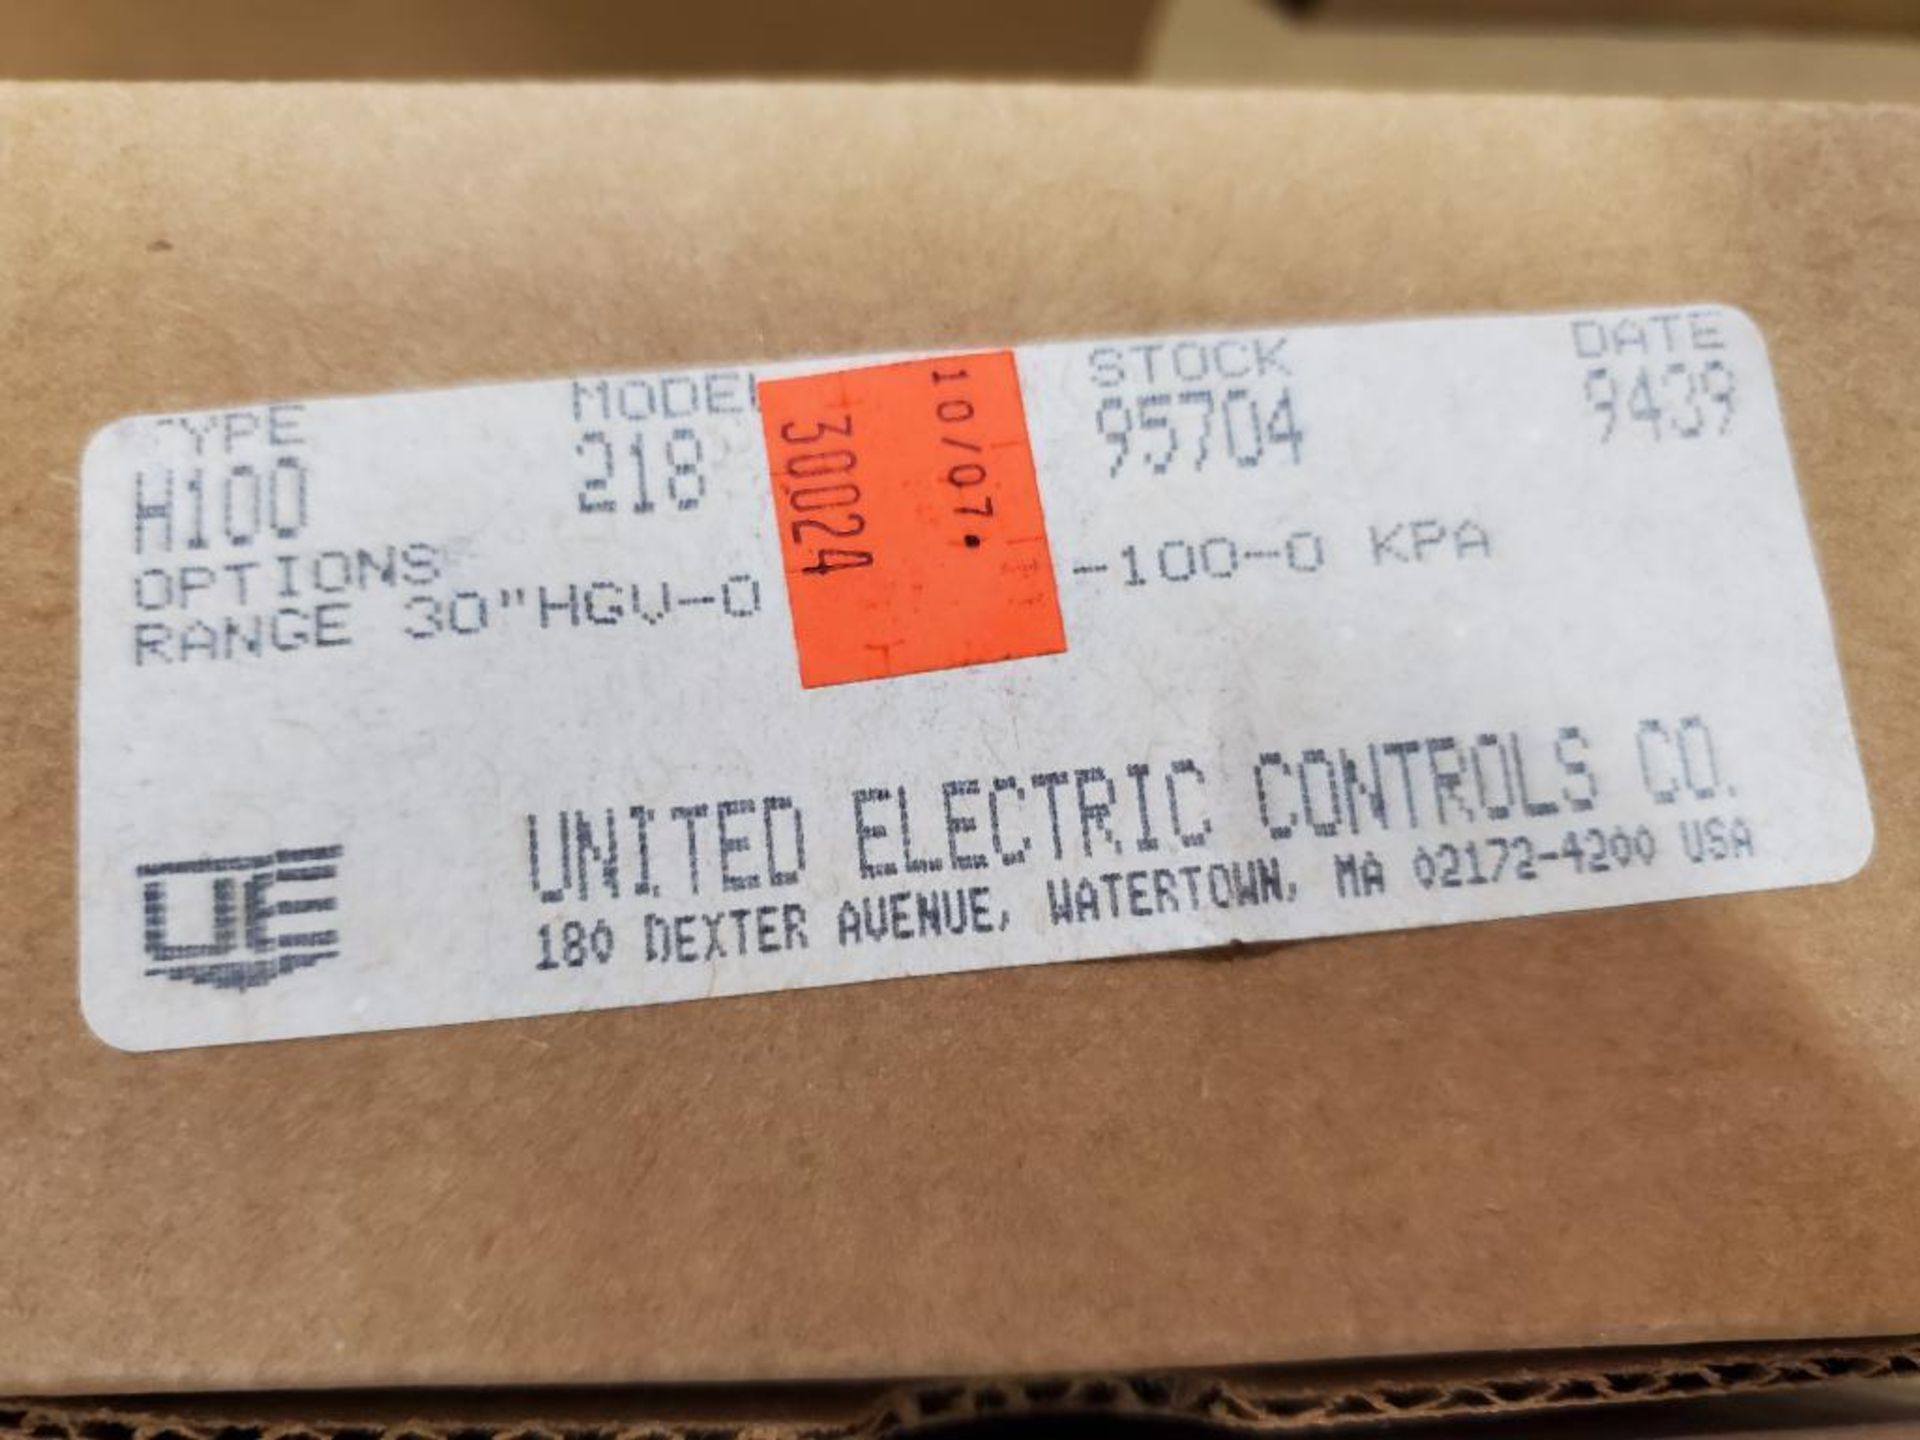 Qty 5 - United Electric controls H100 Model 218 gage. 30" HGV-0 PSI / -100-0 KPA. New in box. - Image 3 of 8